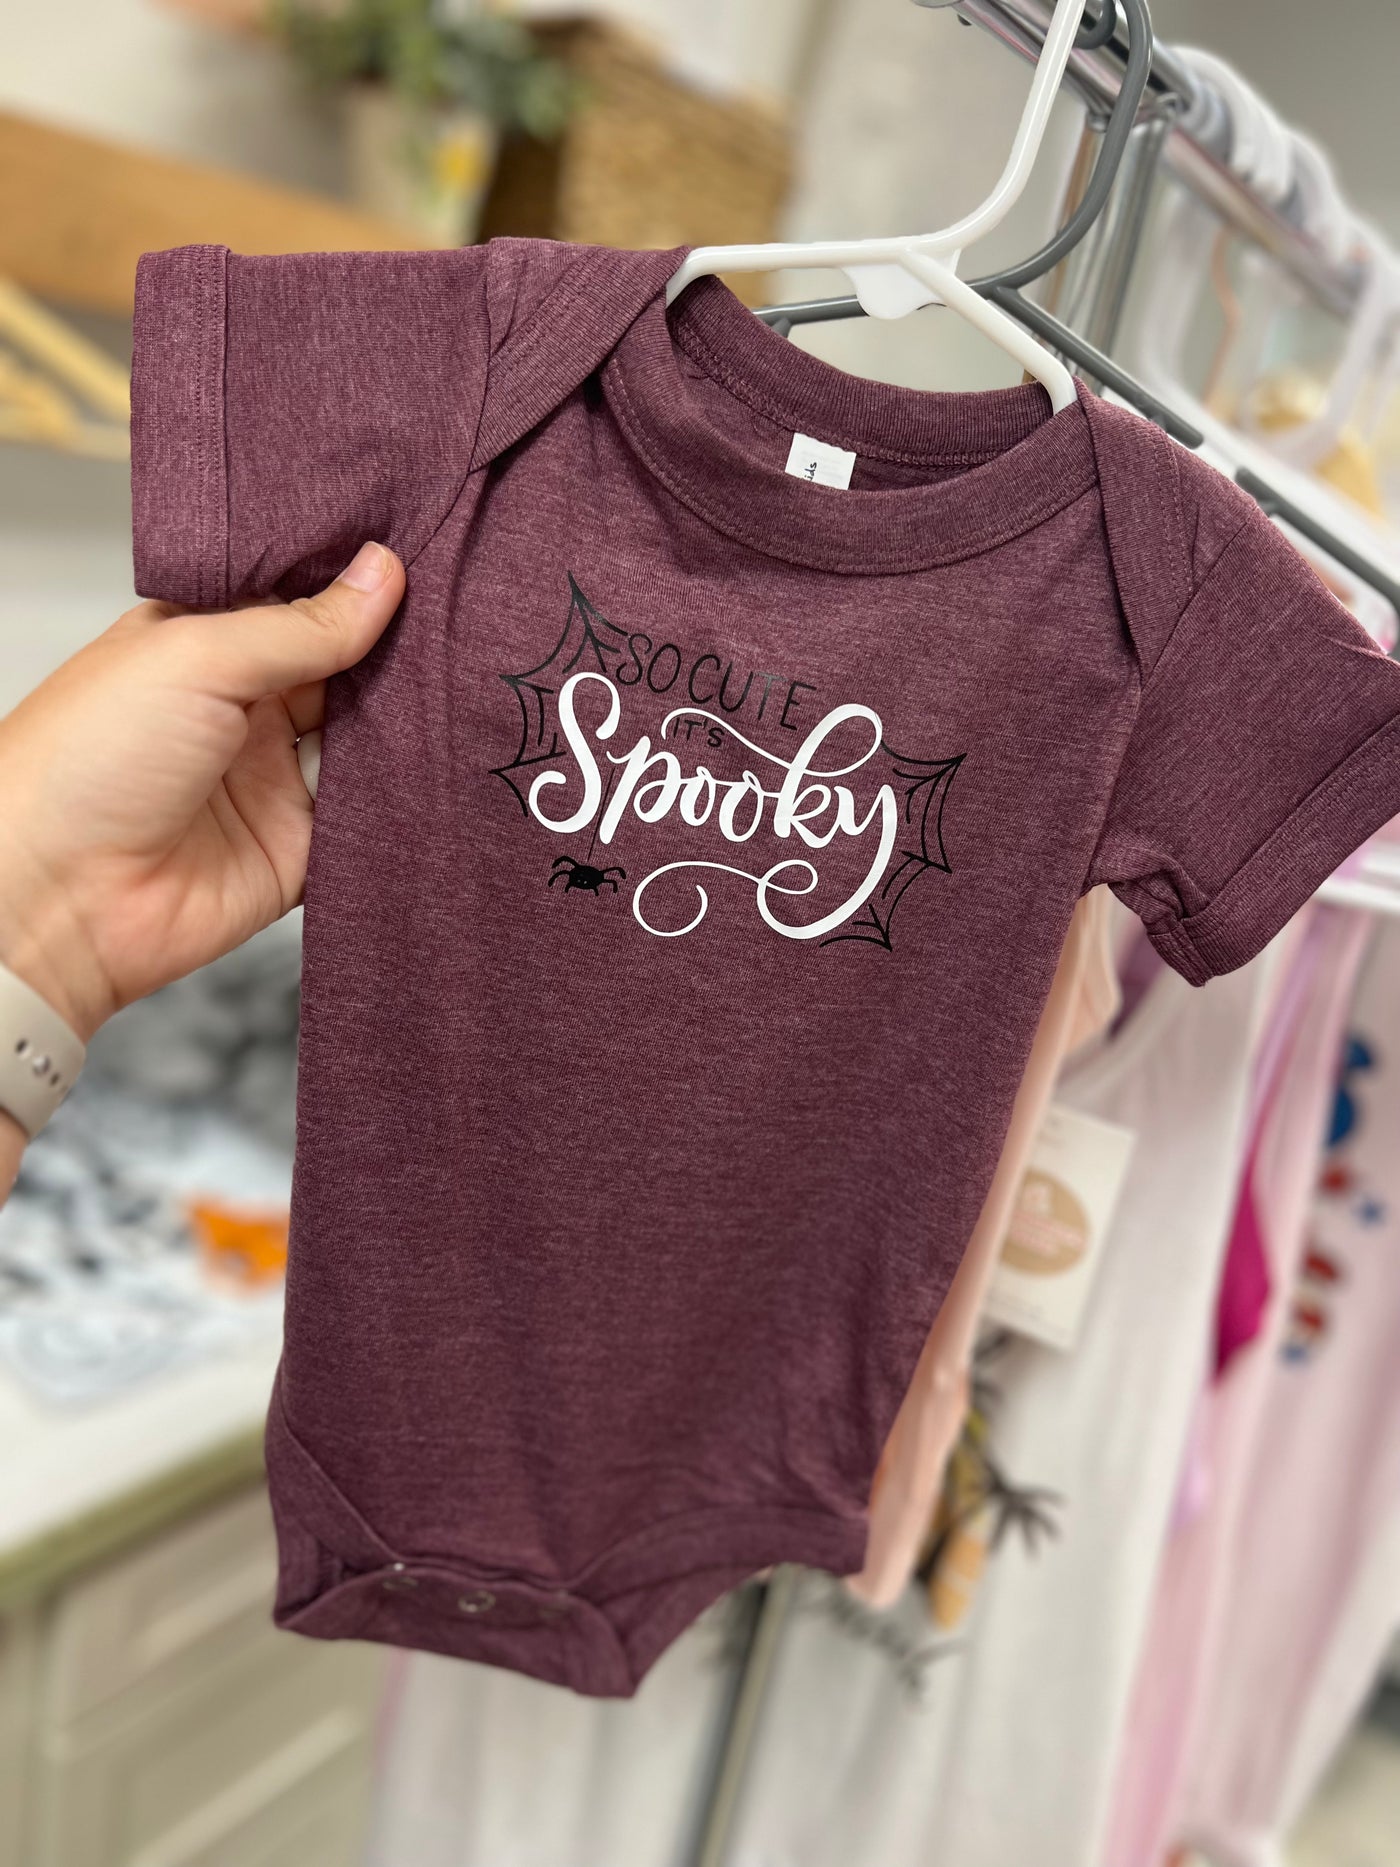 CLEARANCE "So Cute It's Spooky" Infant/Toddler T-shirt